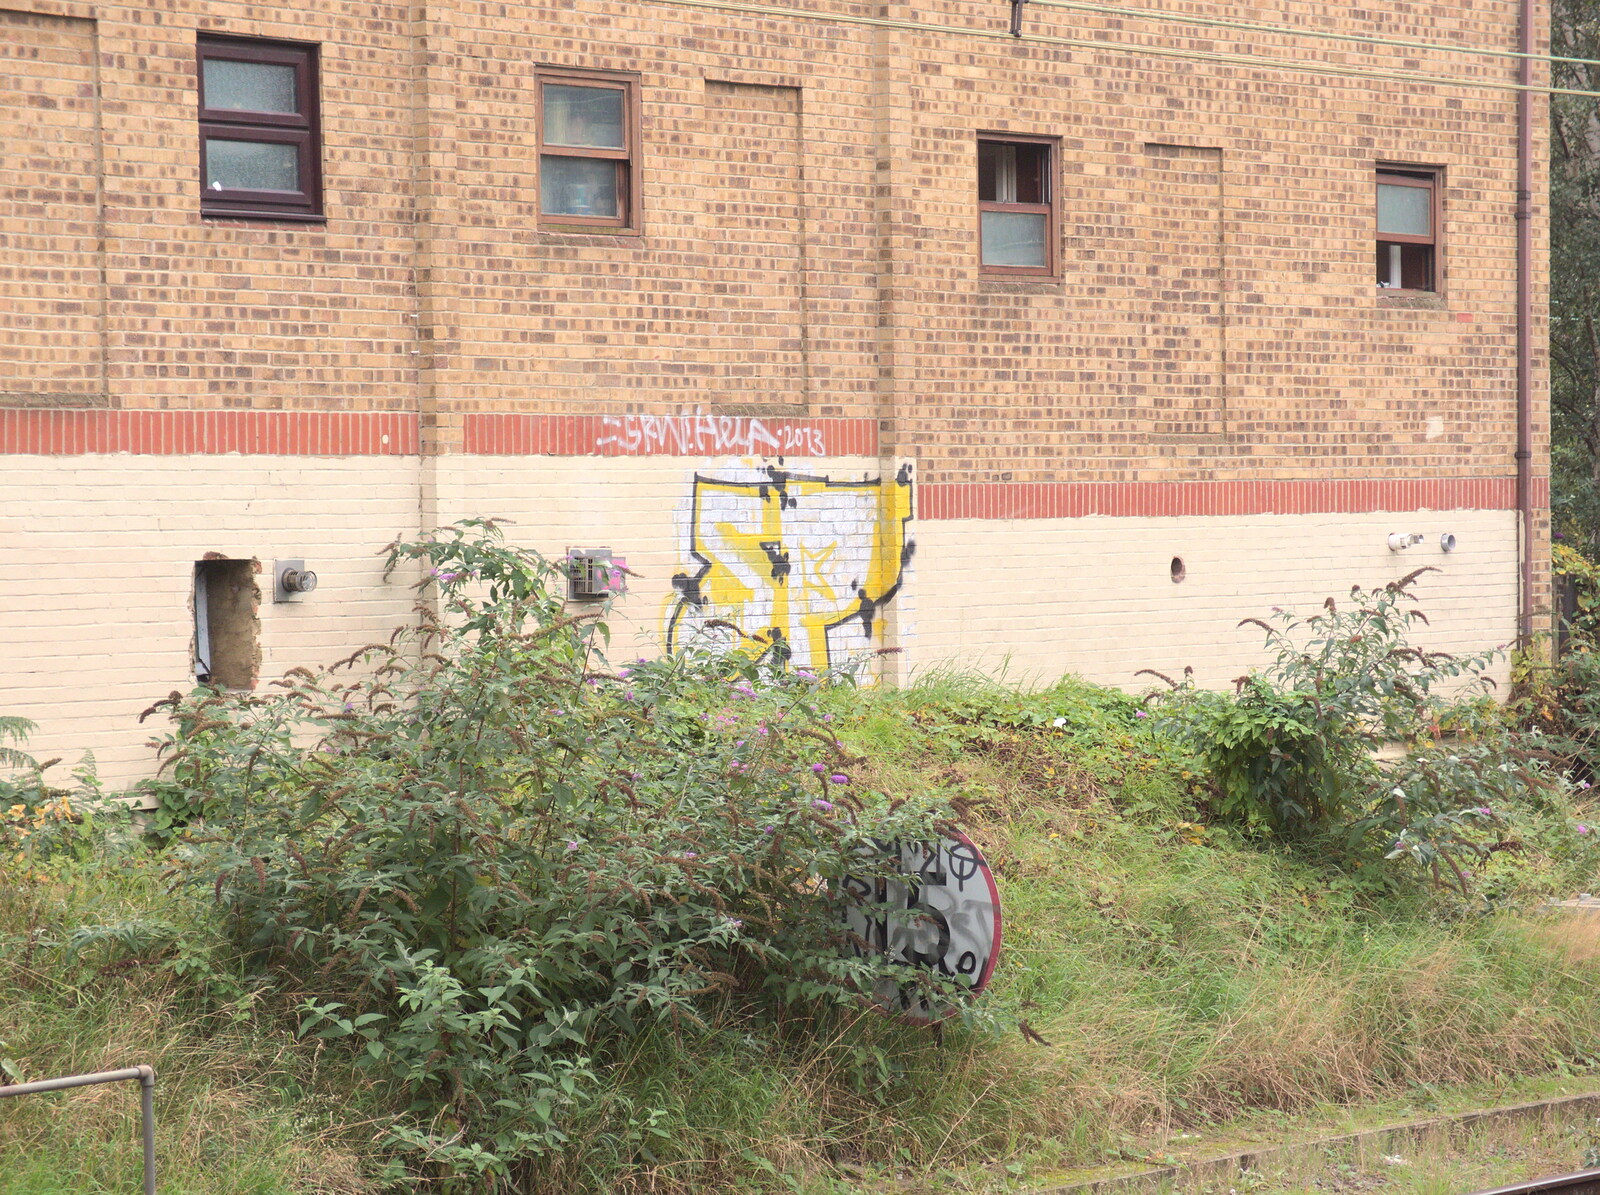 A lineside 15 sign is obscured by buddleia from Bike Rides and the BSCC at the Railway, Mellis and Brome, Suffolk - 18th September 2014